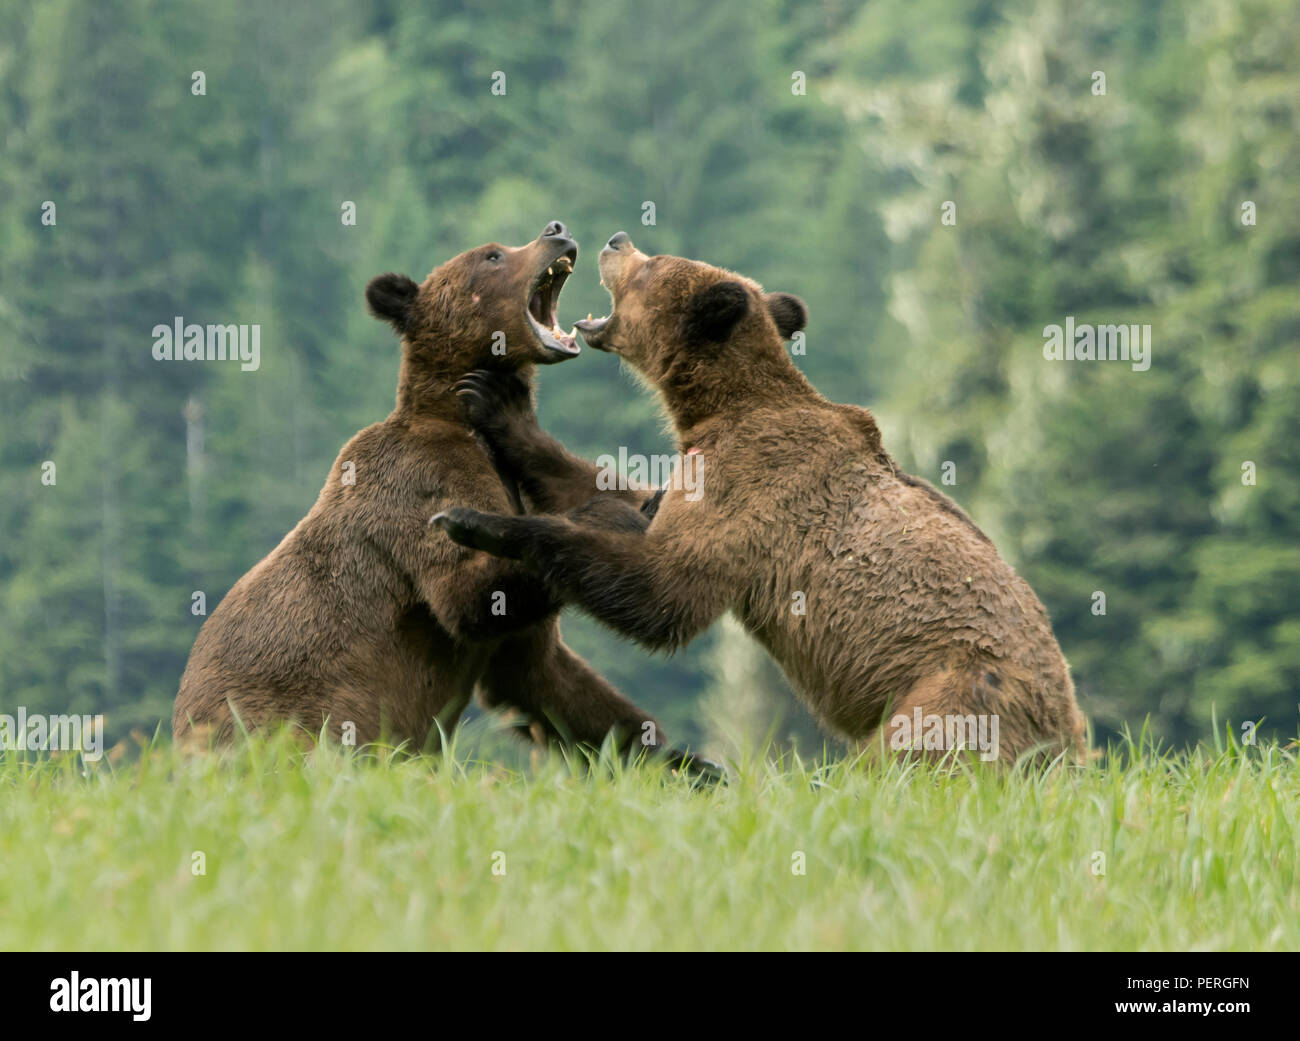 Grizzly Bears (Ursus arctos) play-fighting, Khutzeymateen Grizzly Bear Sanctuary, Great Bear Rainforest, BC, Canada Stock Photo